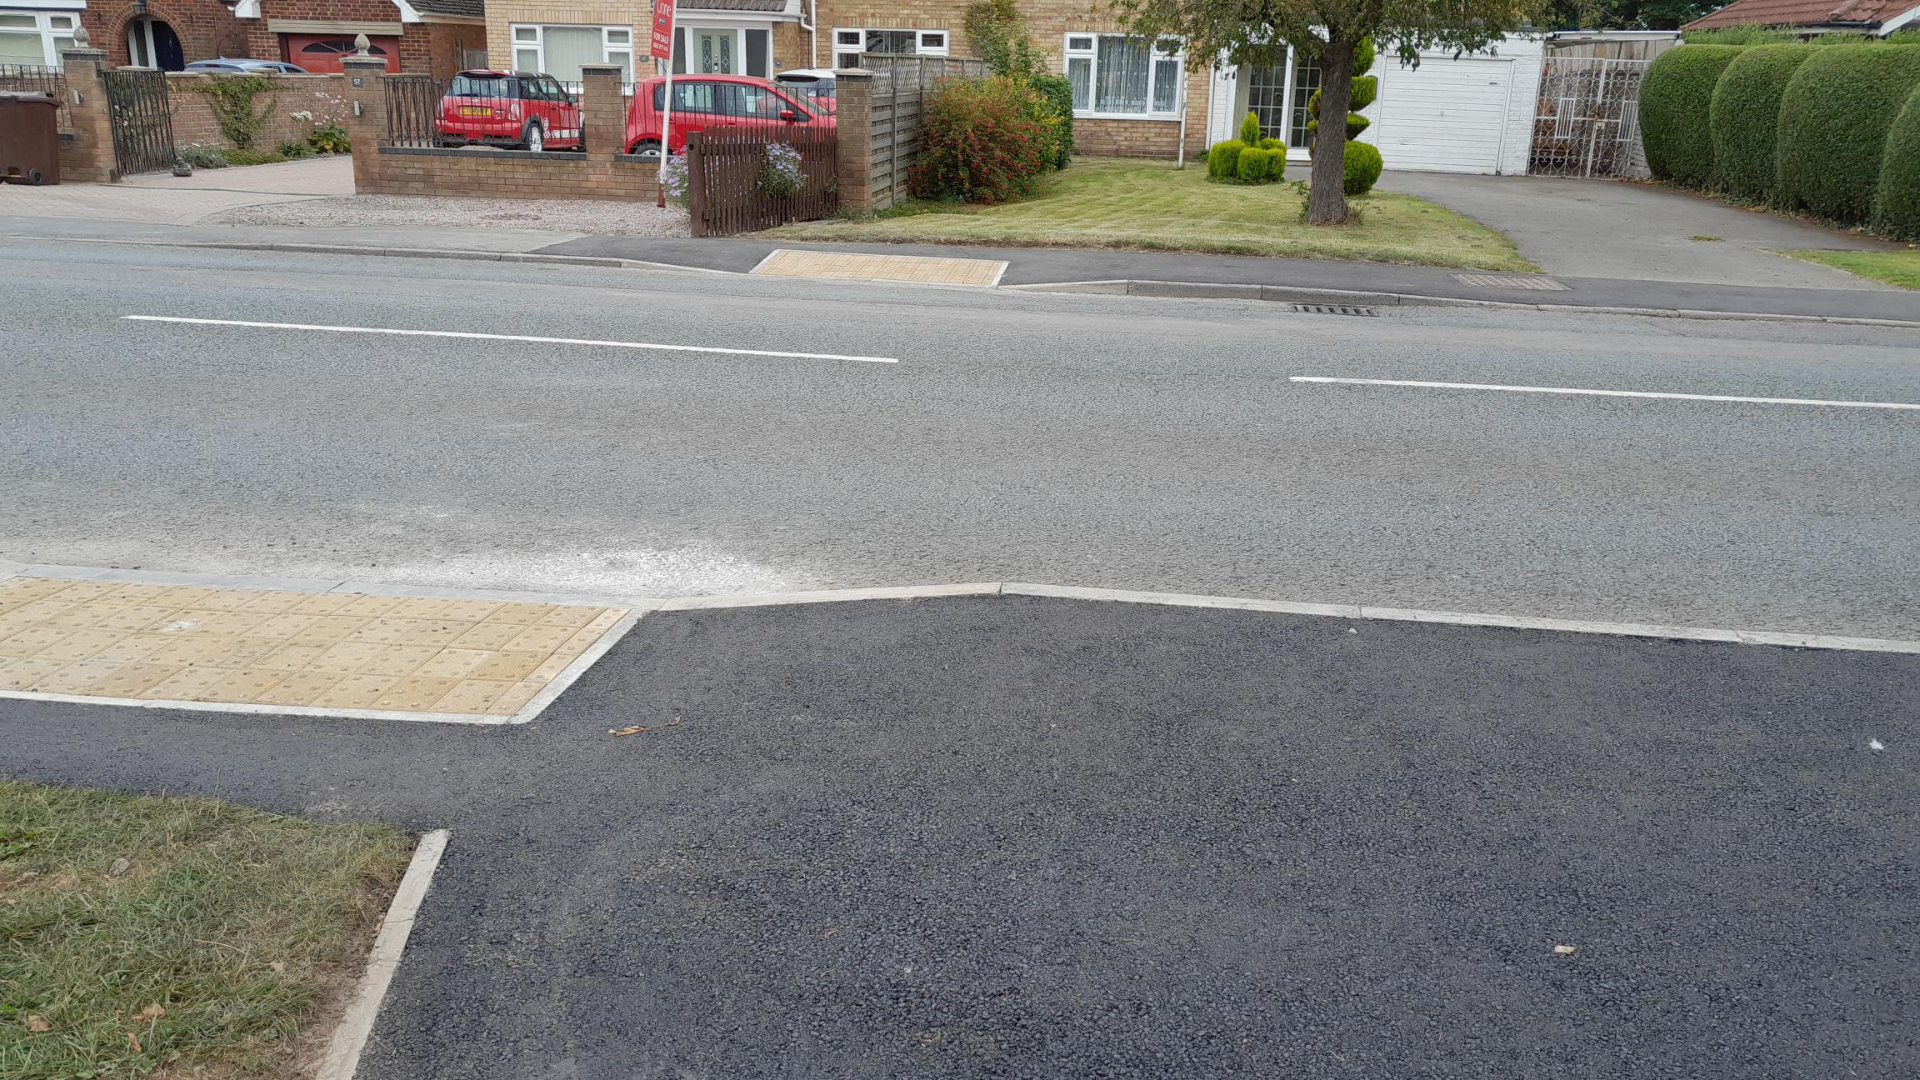 A view of new drop kerbs installed as part of the Spalding active travel scheme